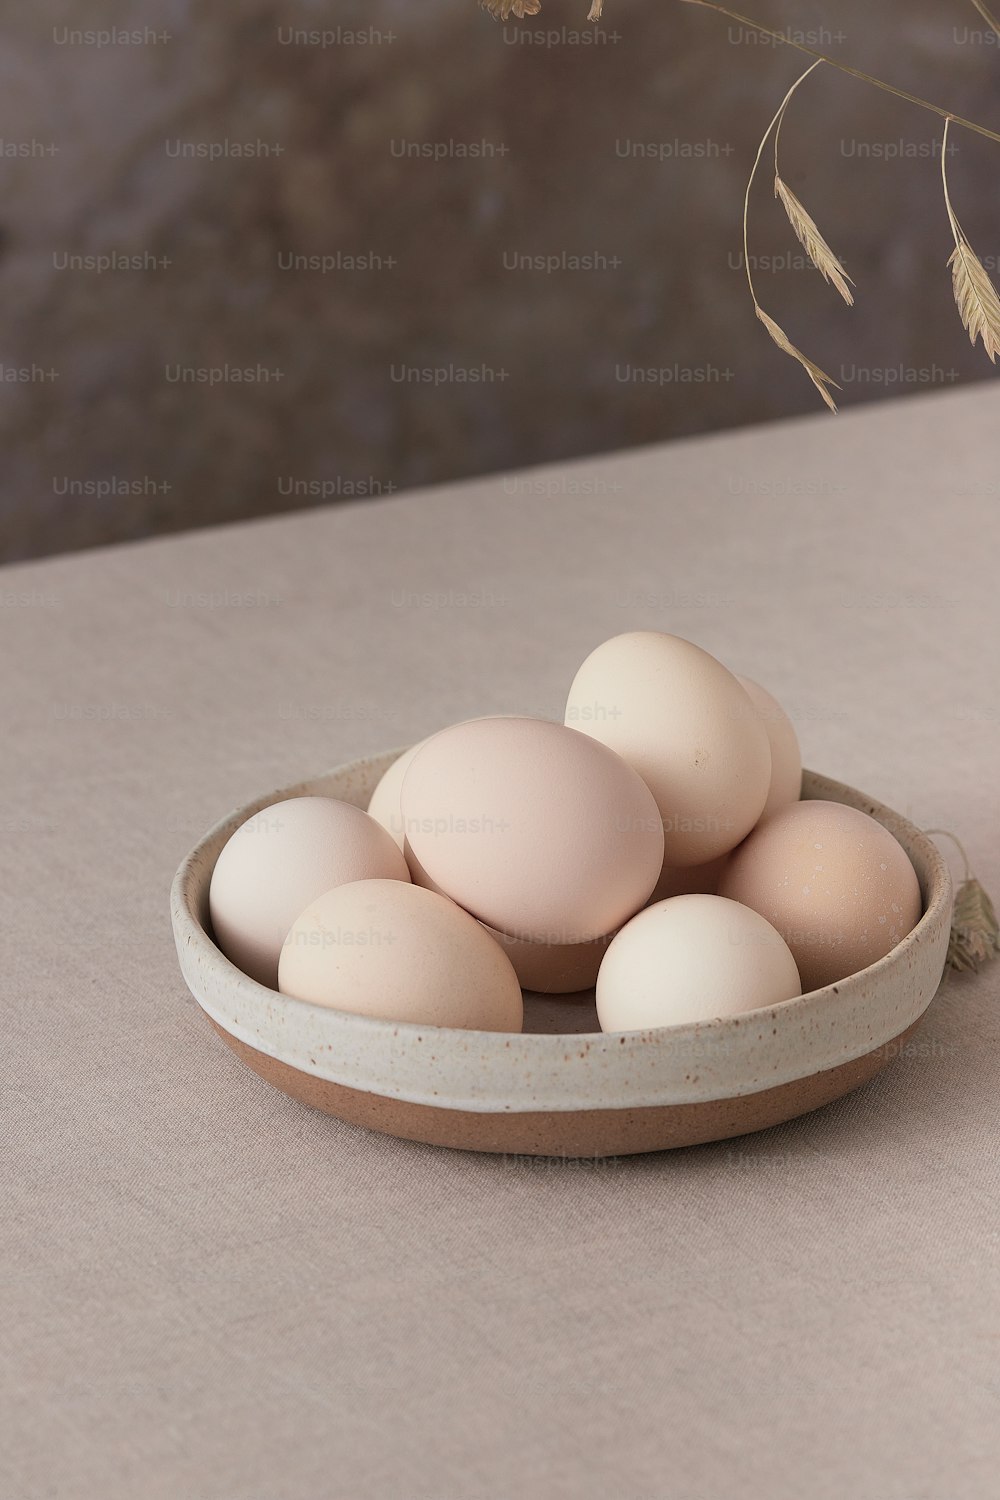 a bowl of eggs sitting on a table